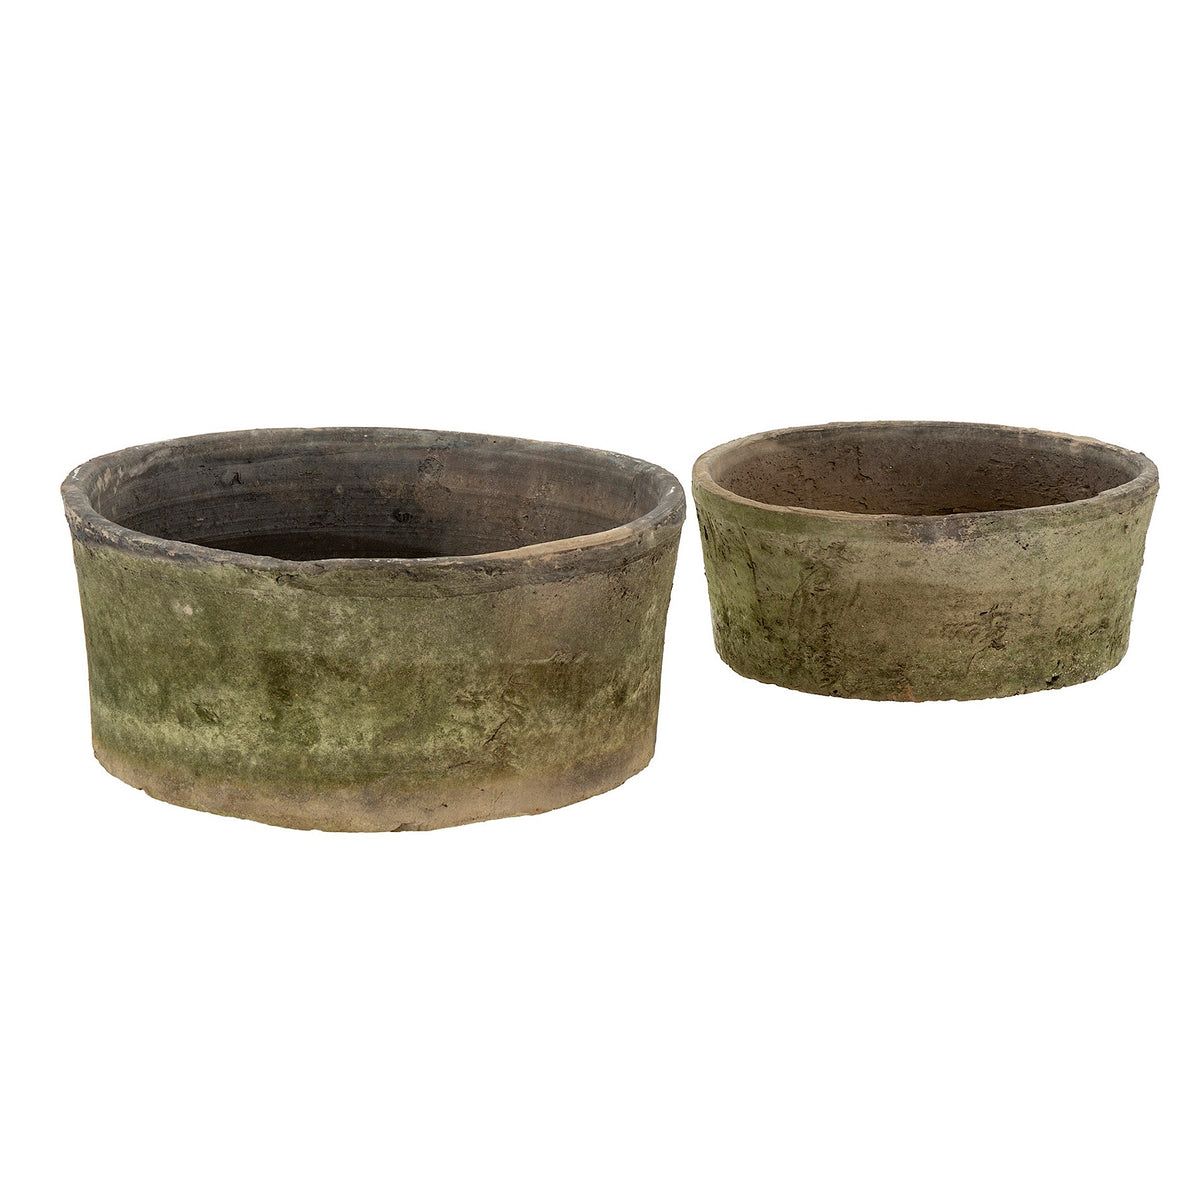 Aged Clay Planters, Antique Blackstone, Two Sizes